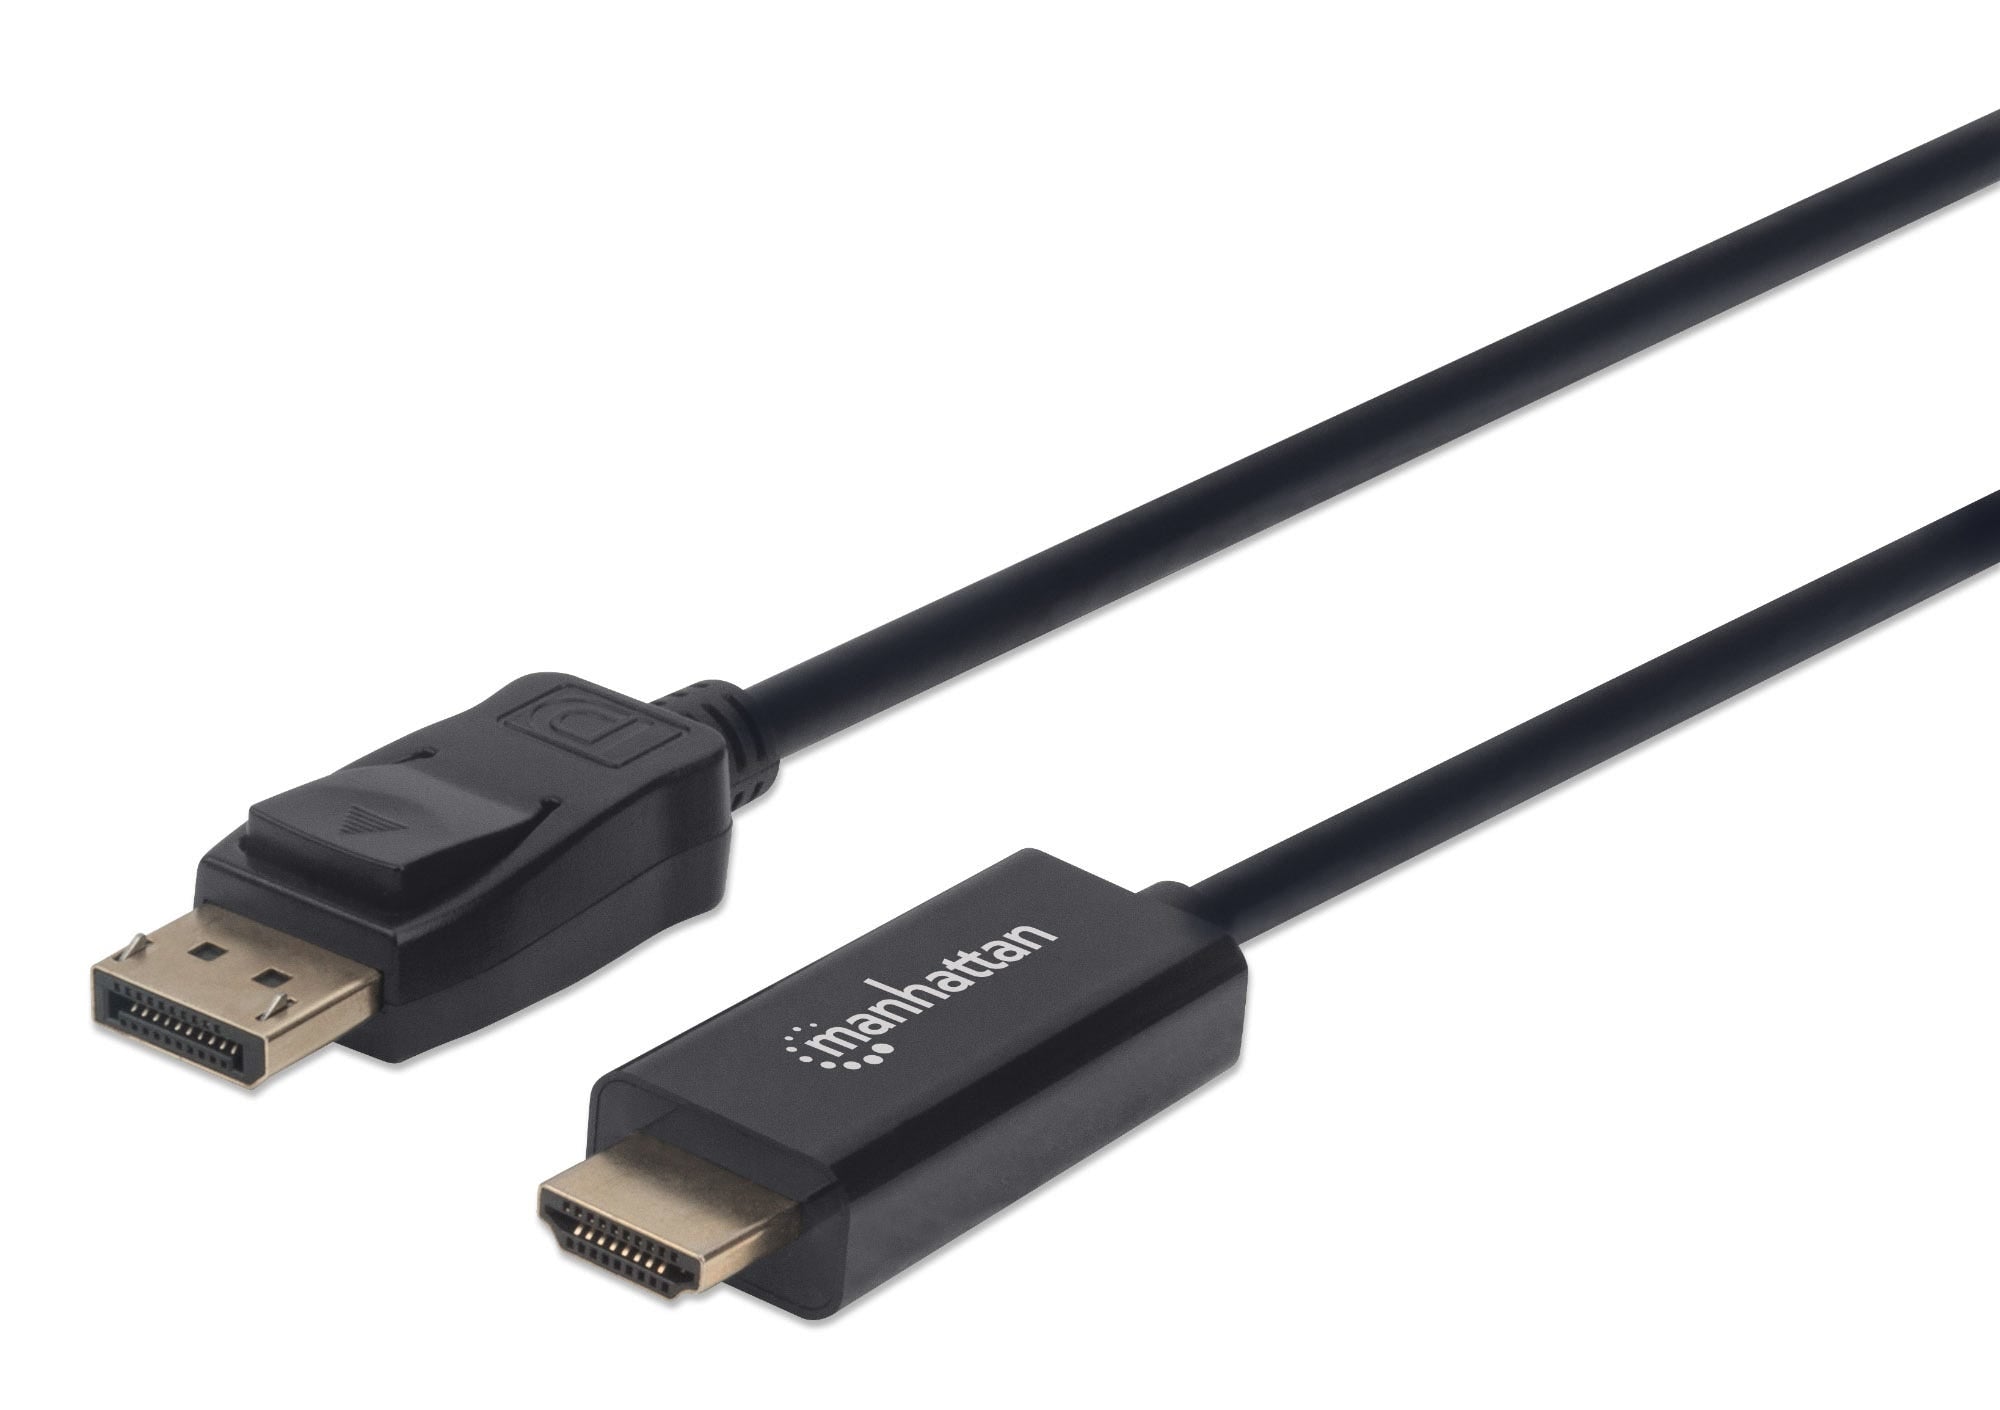 Manhattan DisplayPort 1.1 to HDMI Cable, 1080p@60Hz, 1.8m, Male to Male, DP With Latch, Black, Not Bi-Directional, Three Year Warranty, Polybag